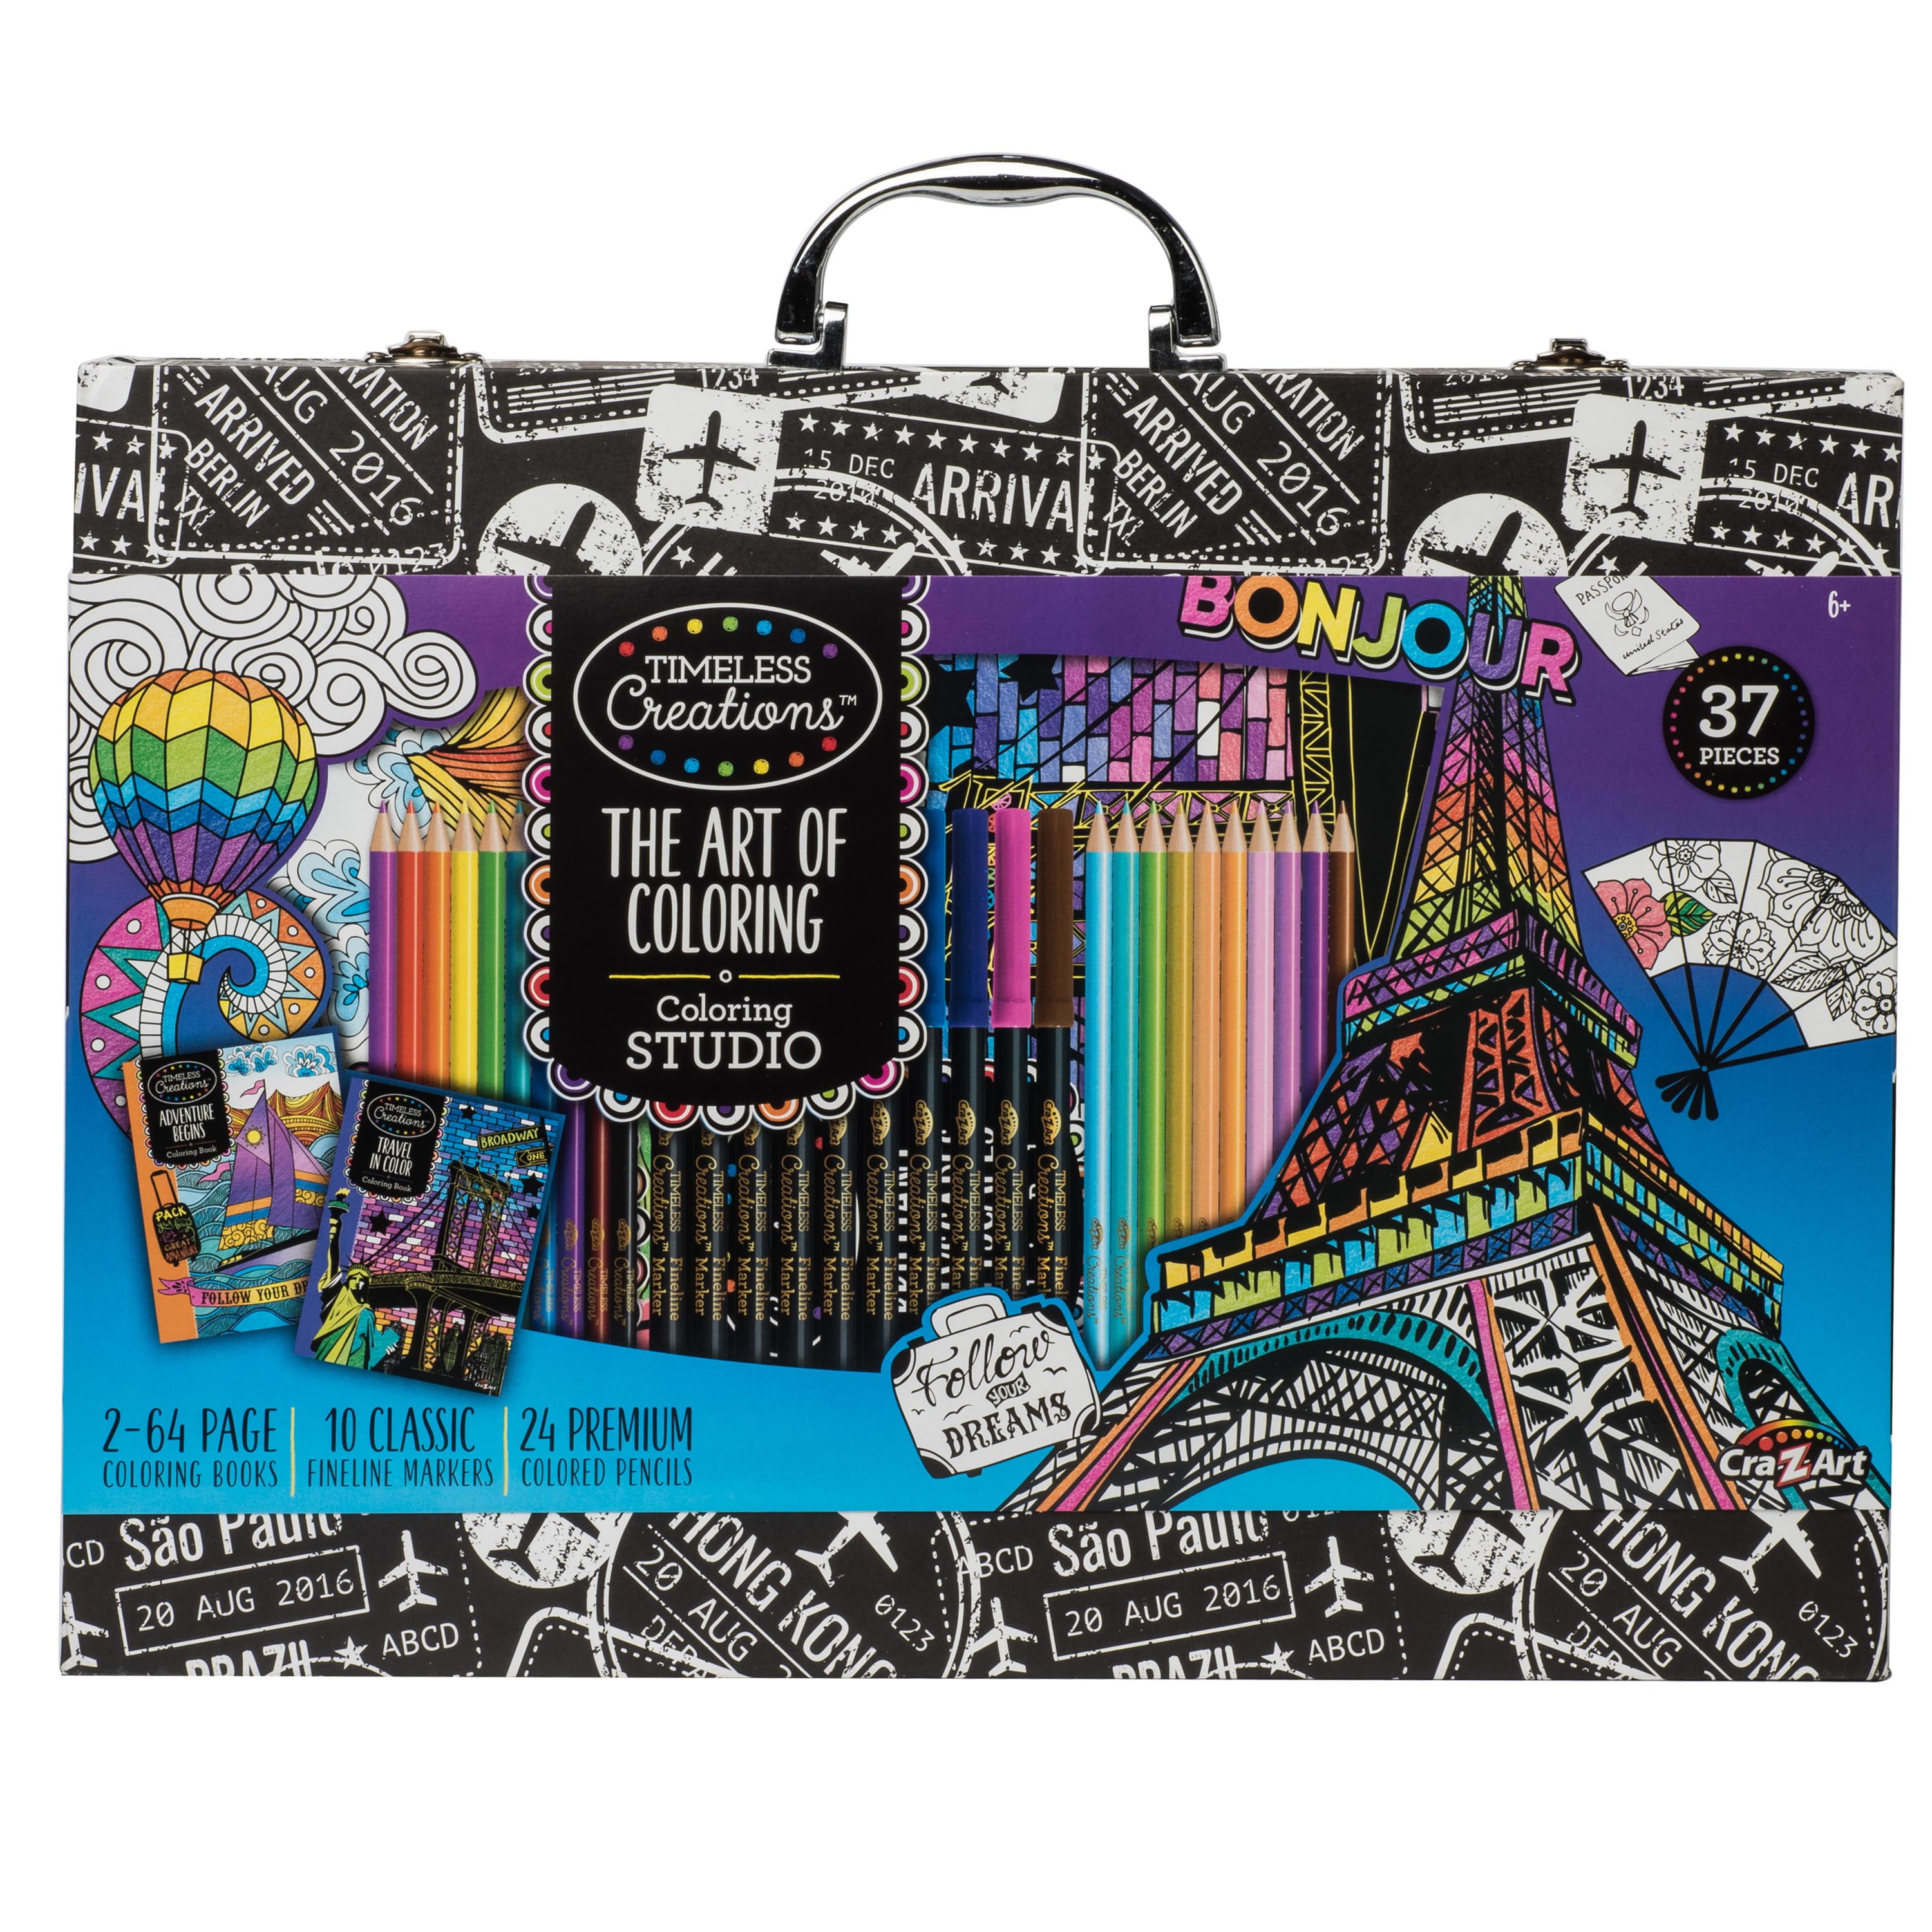 Cra-Z-Art Timeless Creations Multicolor Adult Coloring Drawing Set, Easter Gift